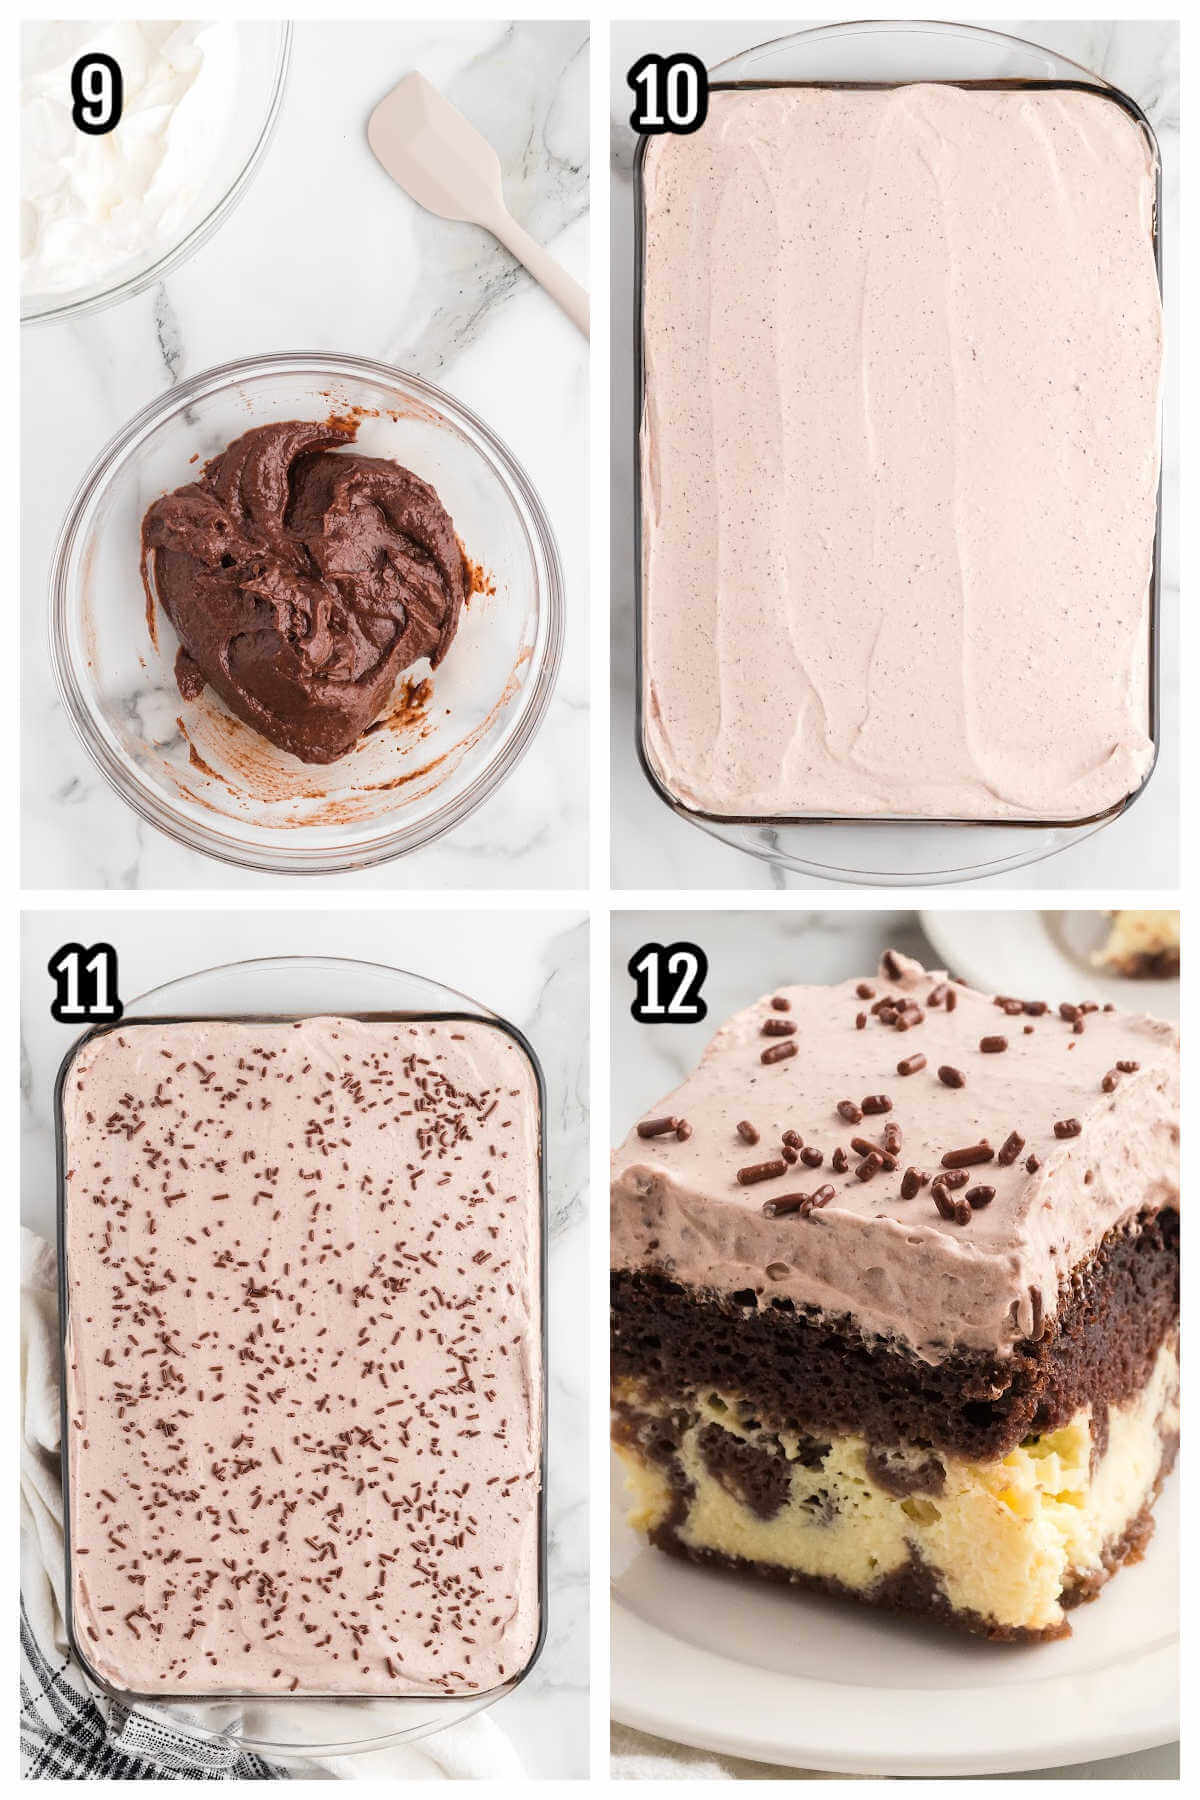 The third and final set of steps to making and decorating the Chocolate Italian Love Cake recipe. 